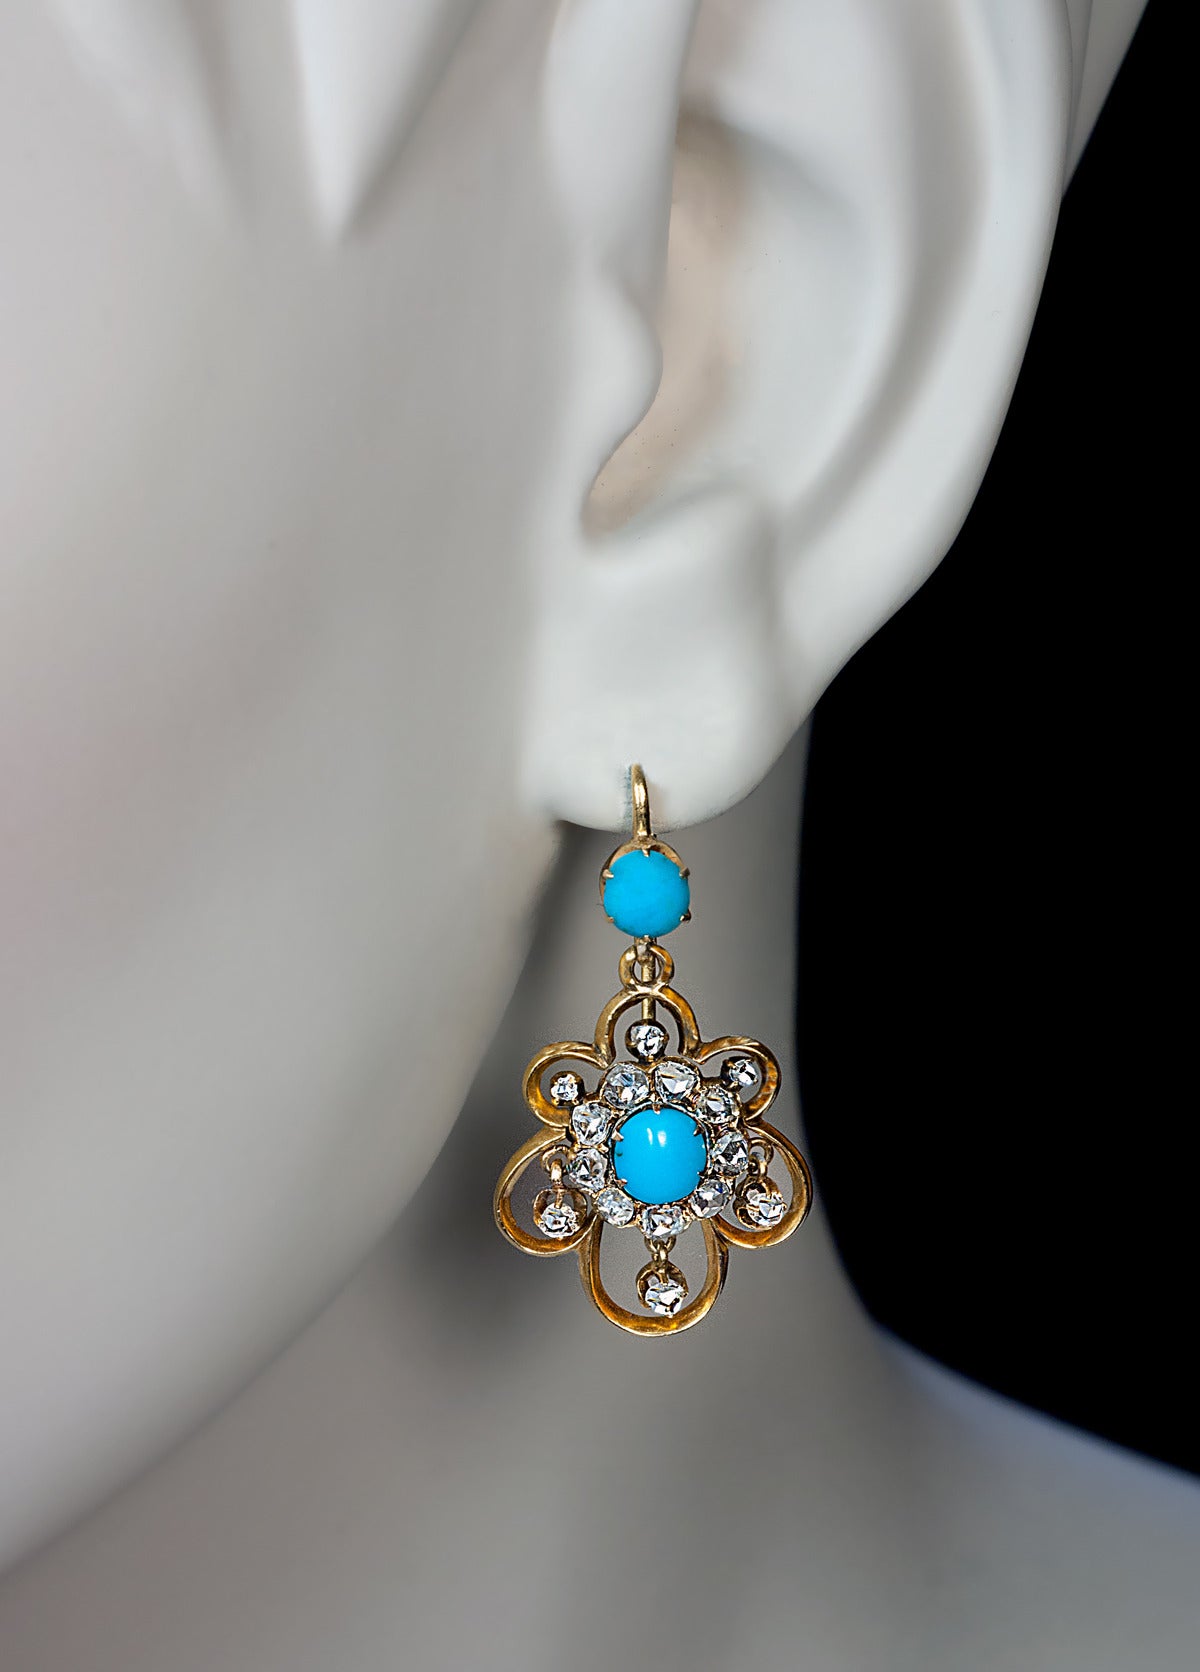 circa 1860

designed as stylized openwork gold flower heads embellished with cabochon turquoise and old rose cut diamonds

total length 34 mm (1 3/8 in.)